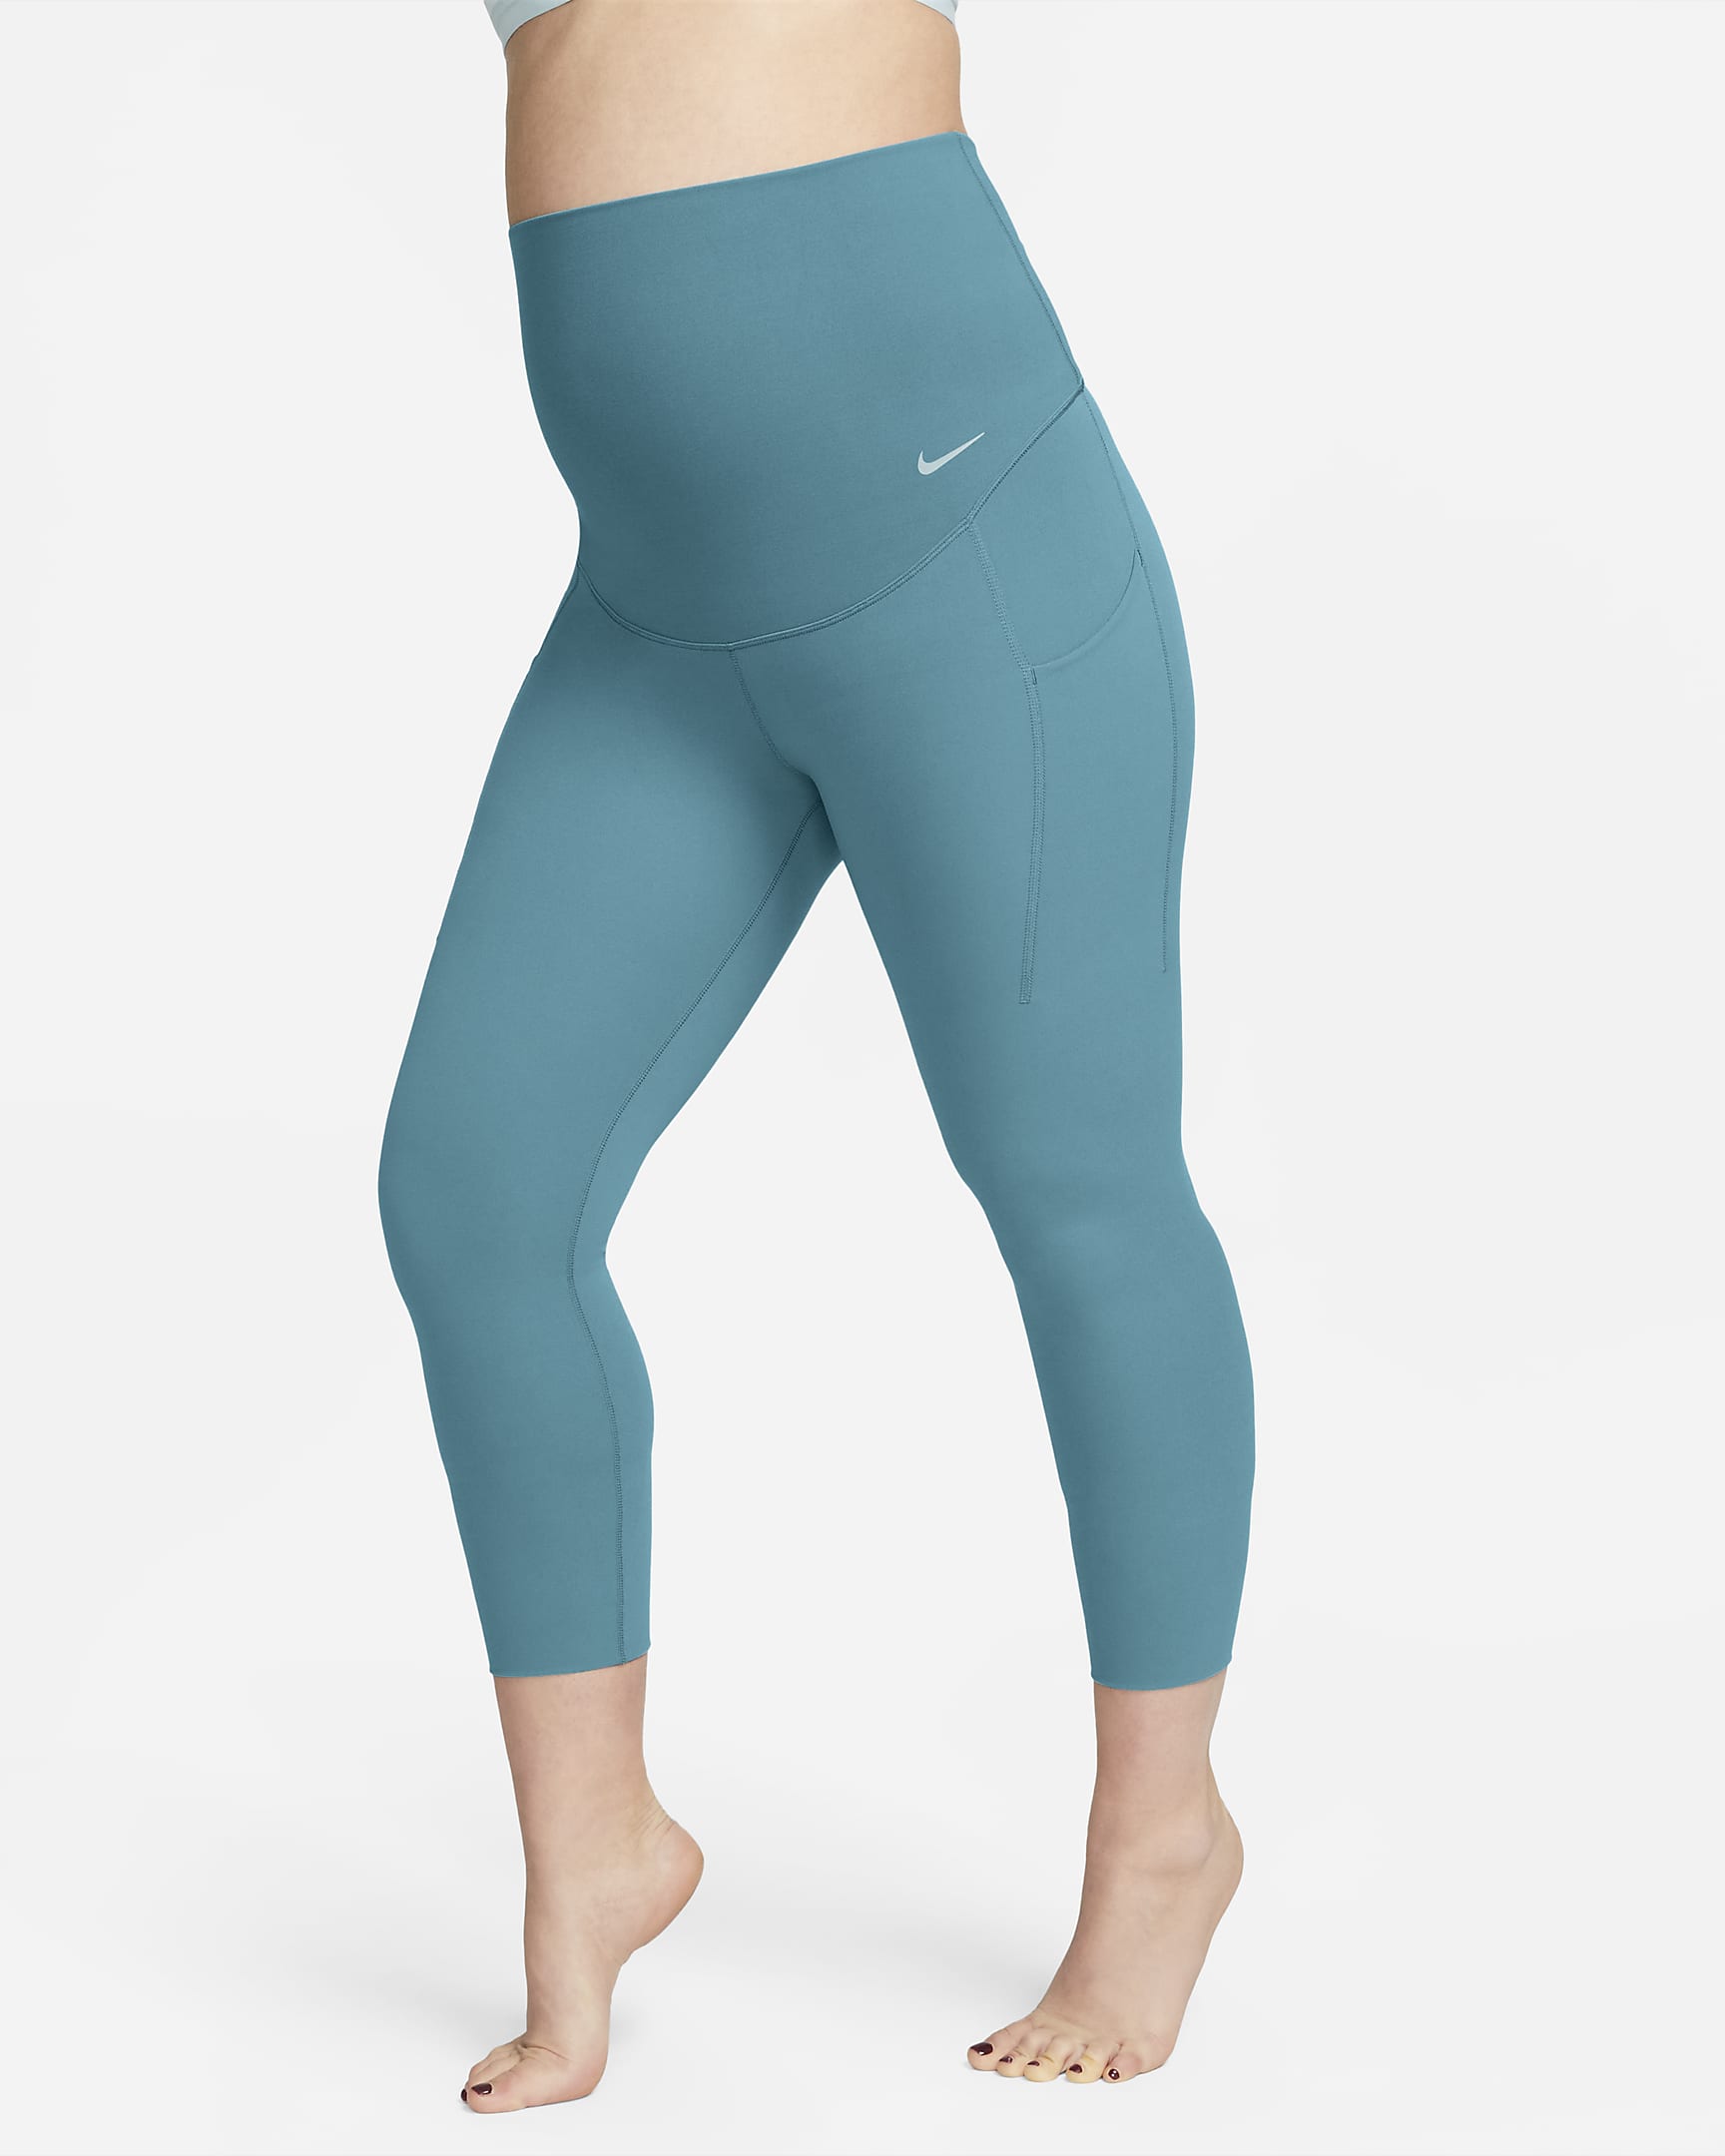 Nike Zenvy (M) Women's Gentle-Support High-Waisted 7/8 Leggings with